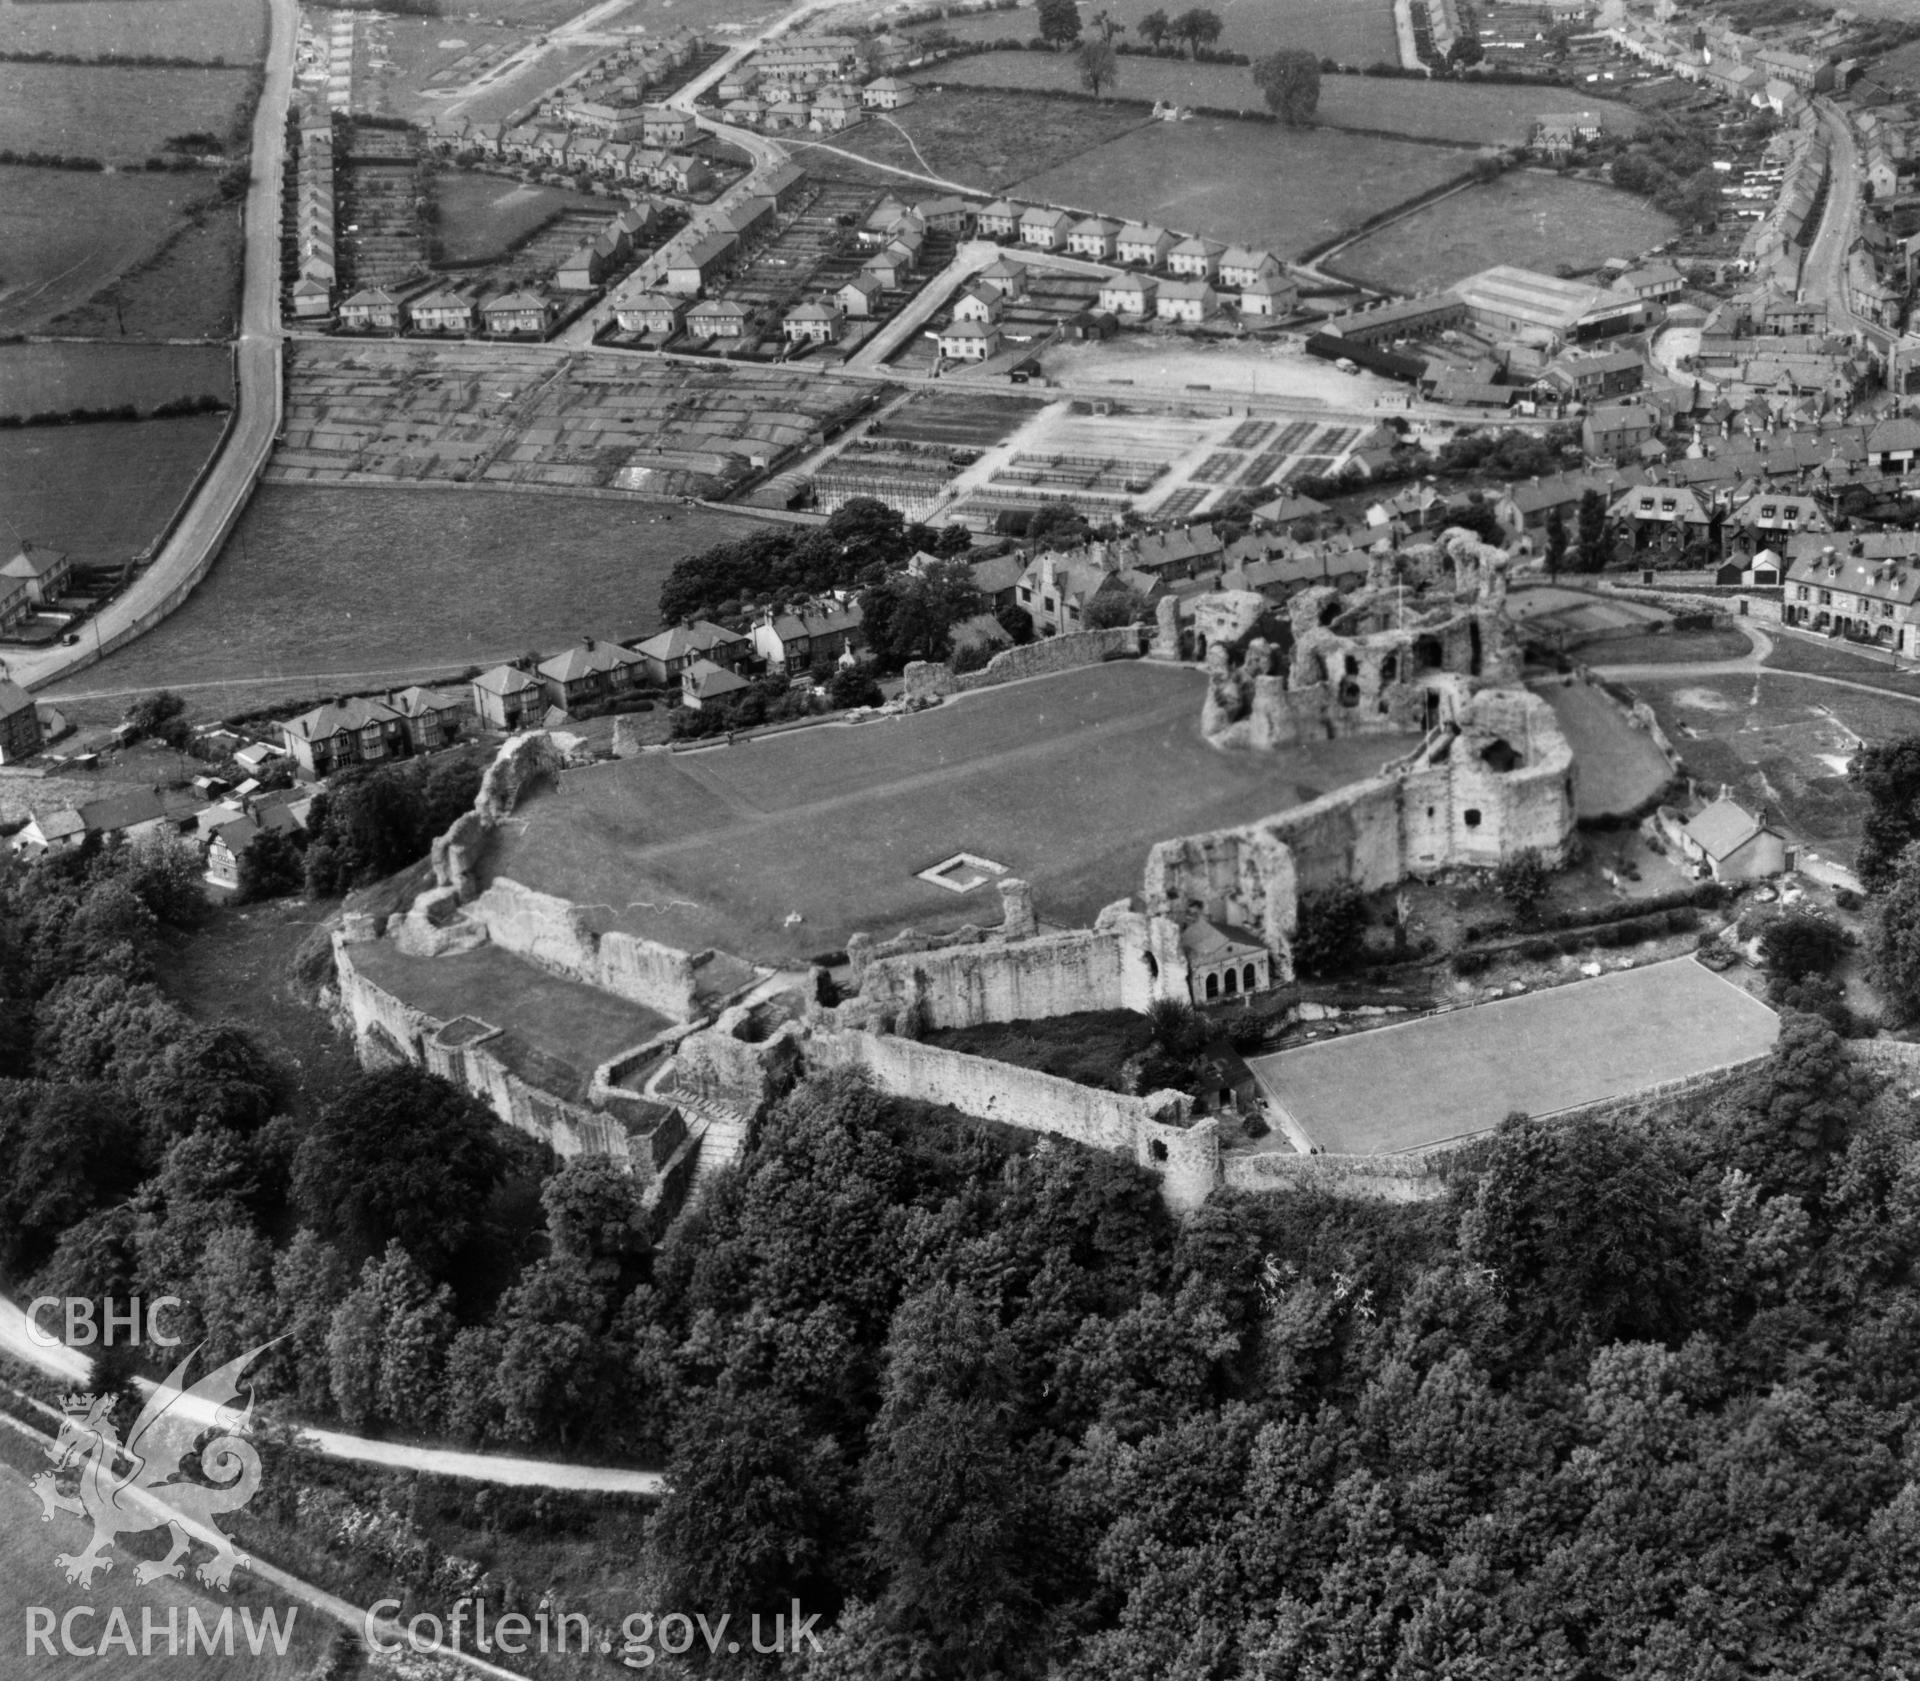 View of Denbigh Upper town showing castle, Smithfield market and housing at Lenten Pool. Oblique aerial photograph, 5?" cut roll film.